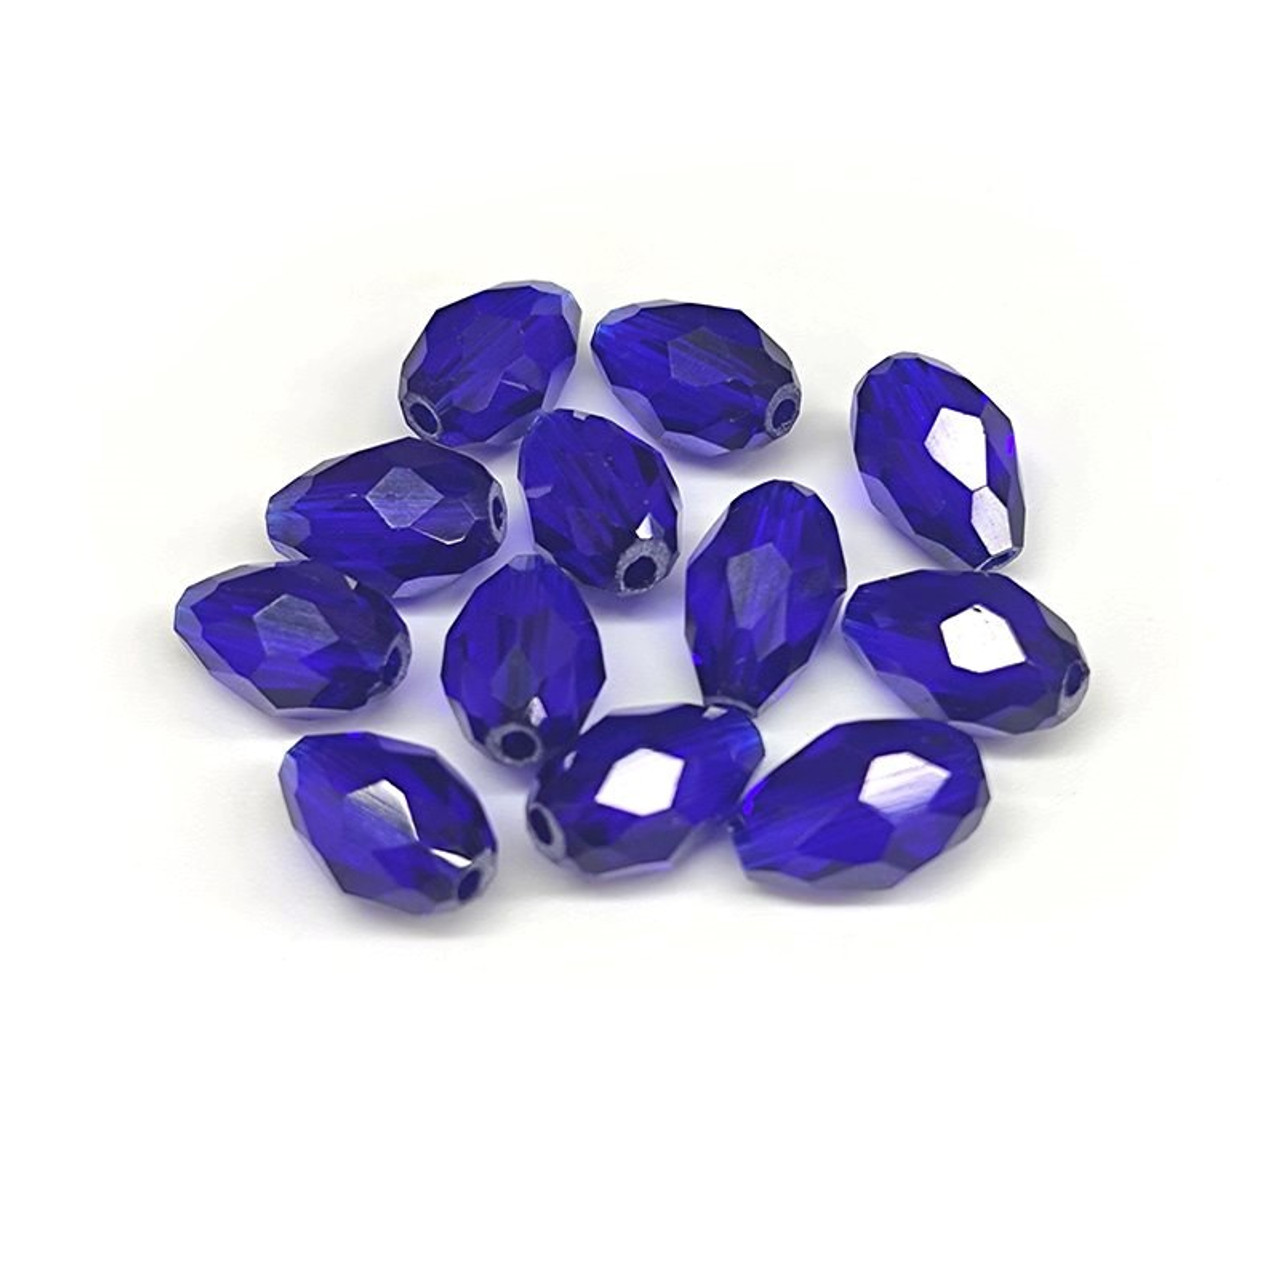 Eureka BASICS Faceted Teardrop Glass Beads SIAM 12x8mm (Pack of 20)